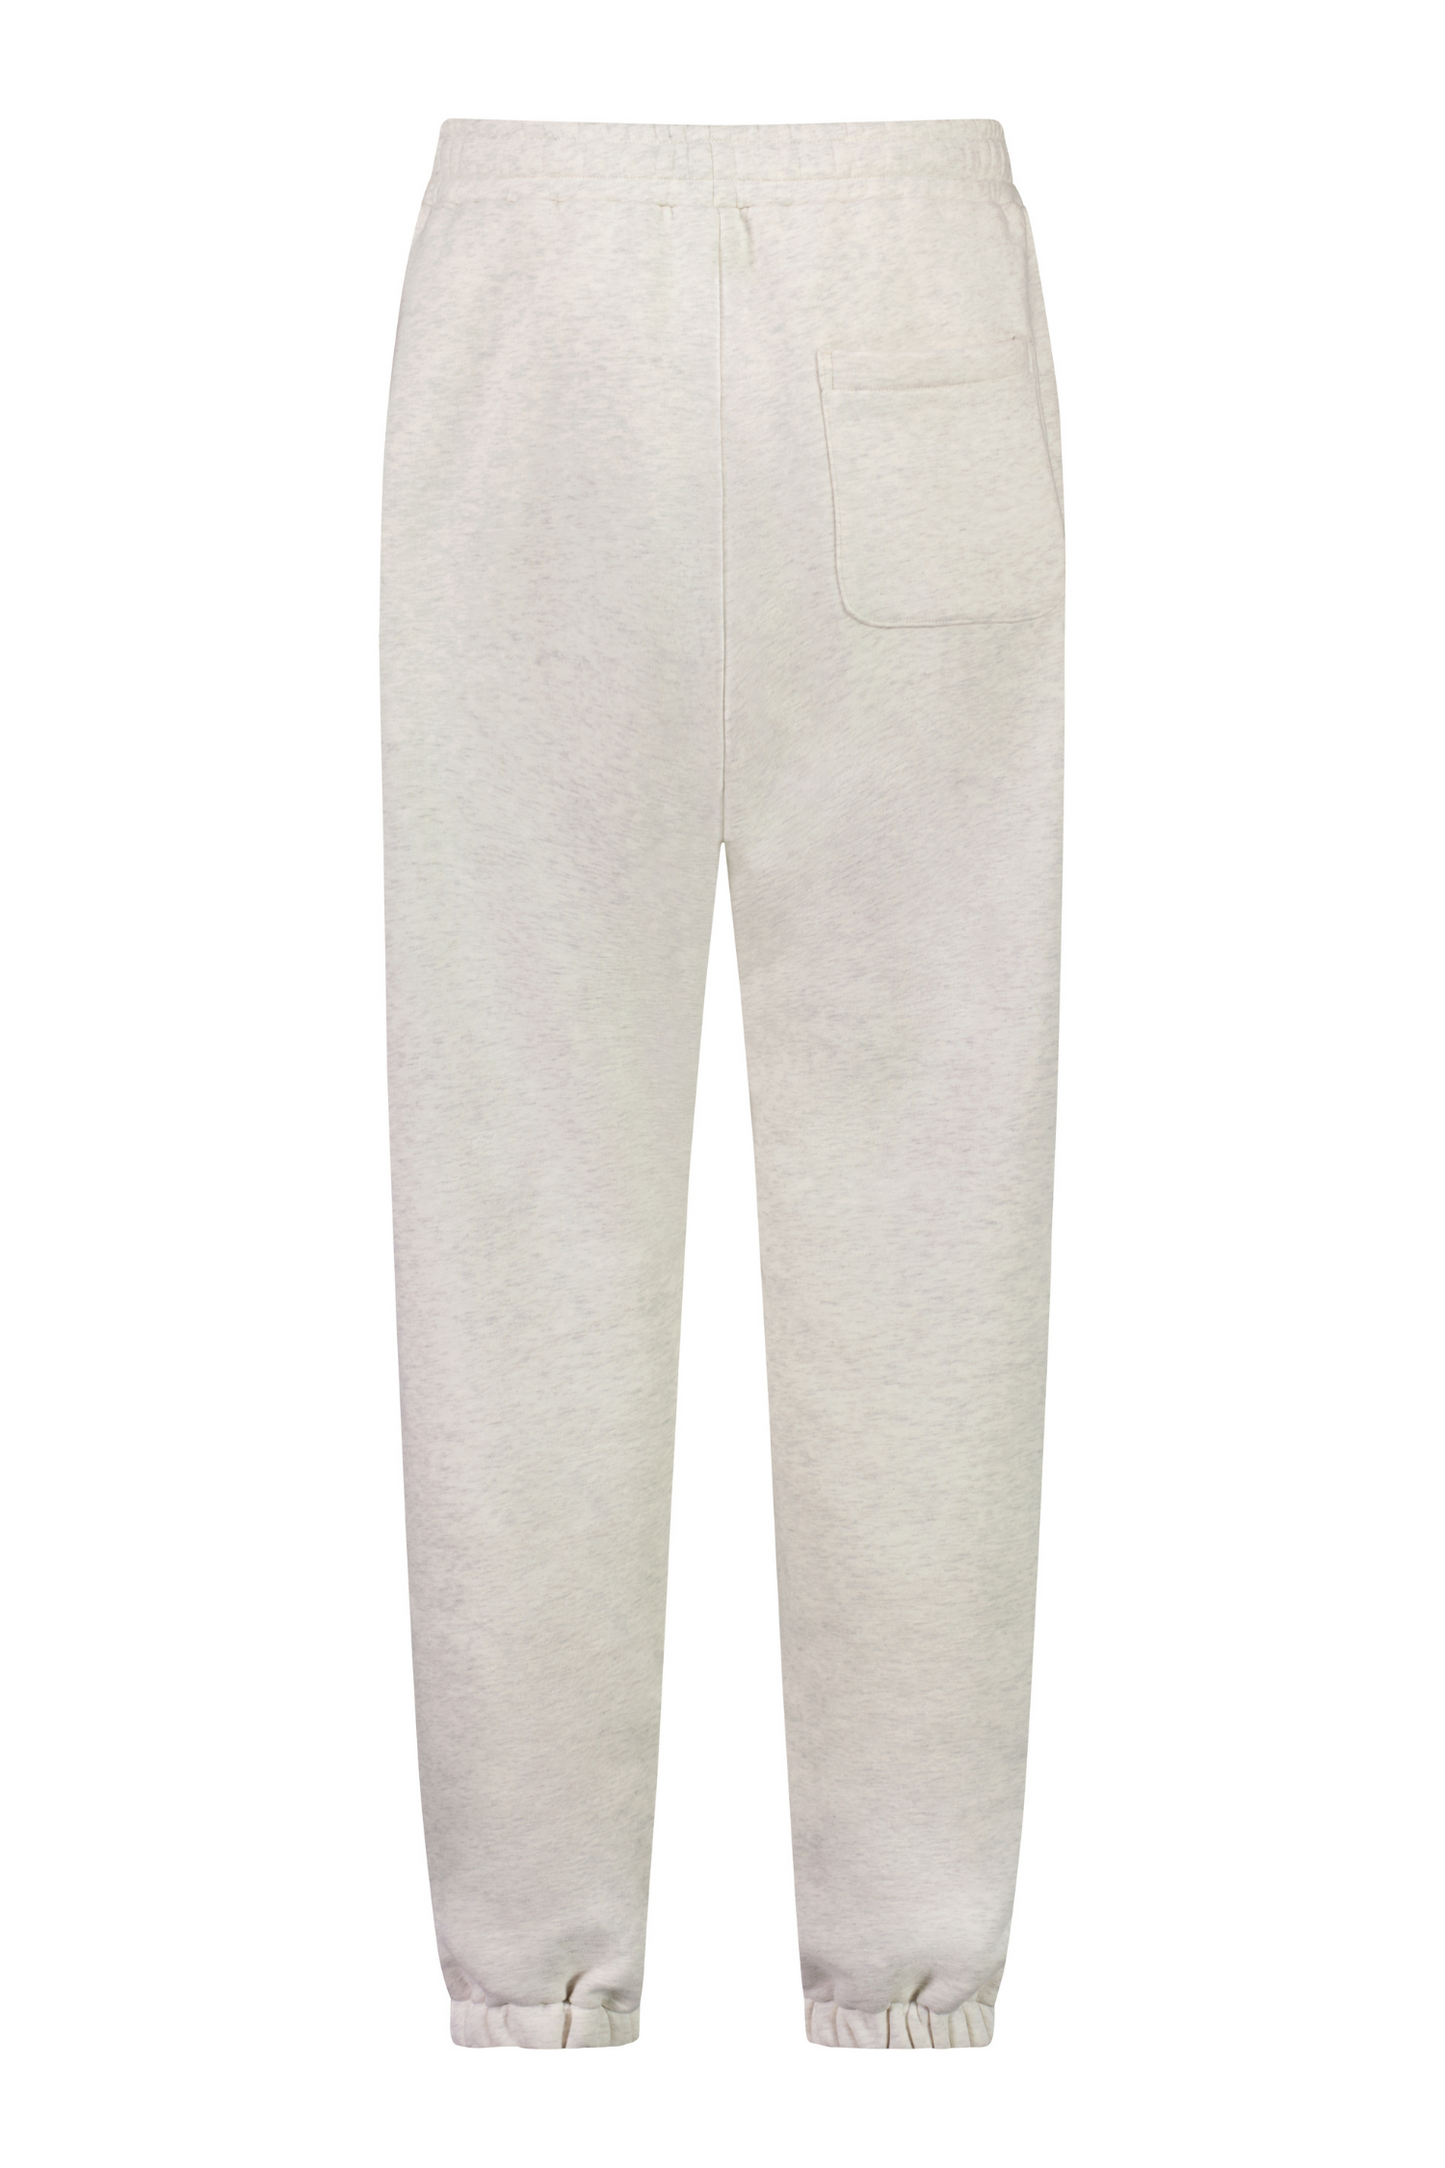 Claremont Trackpant - Grey Marle